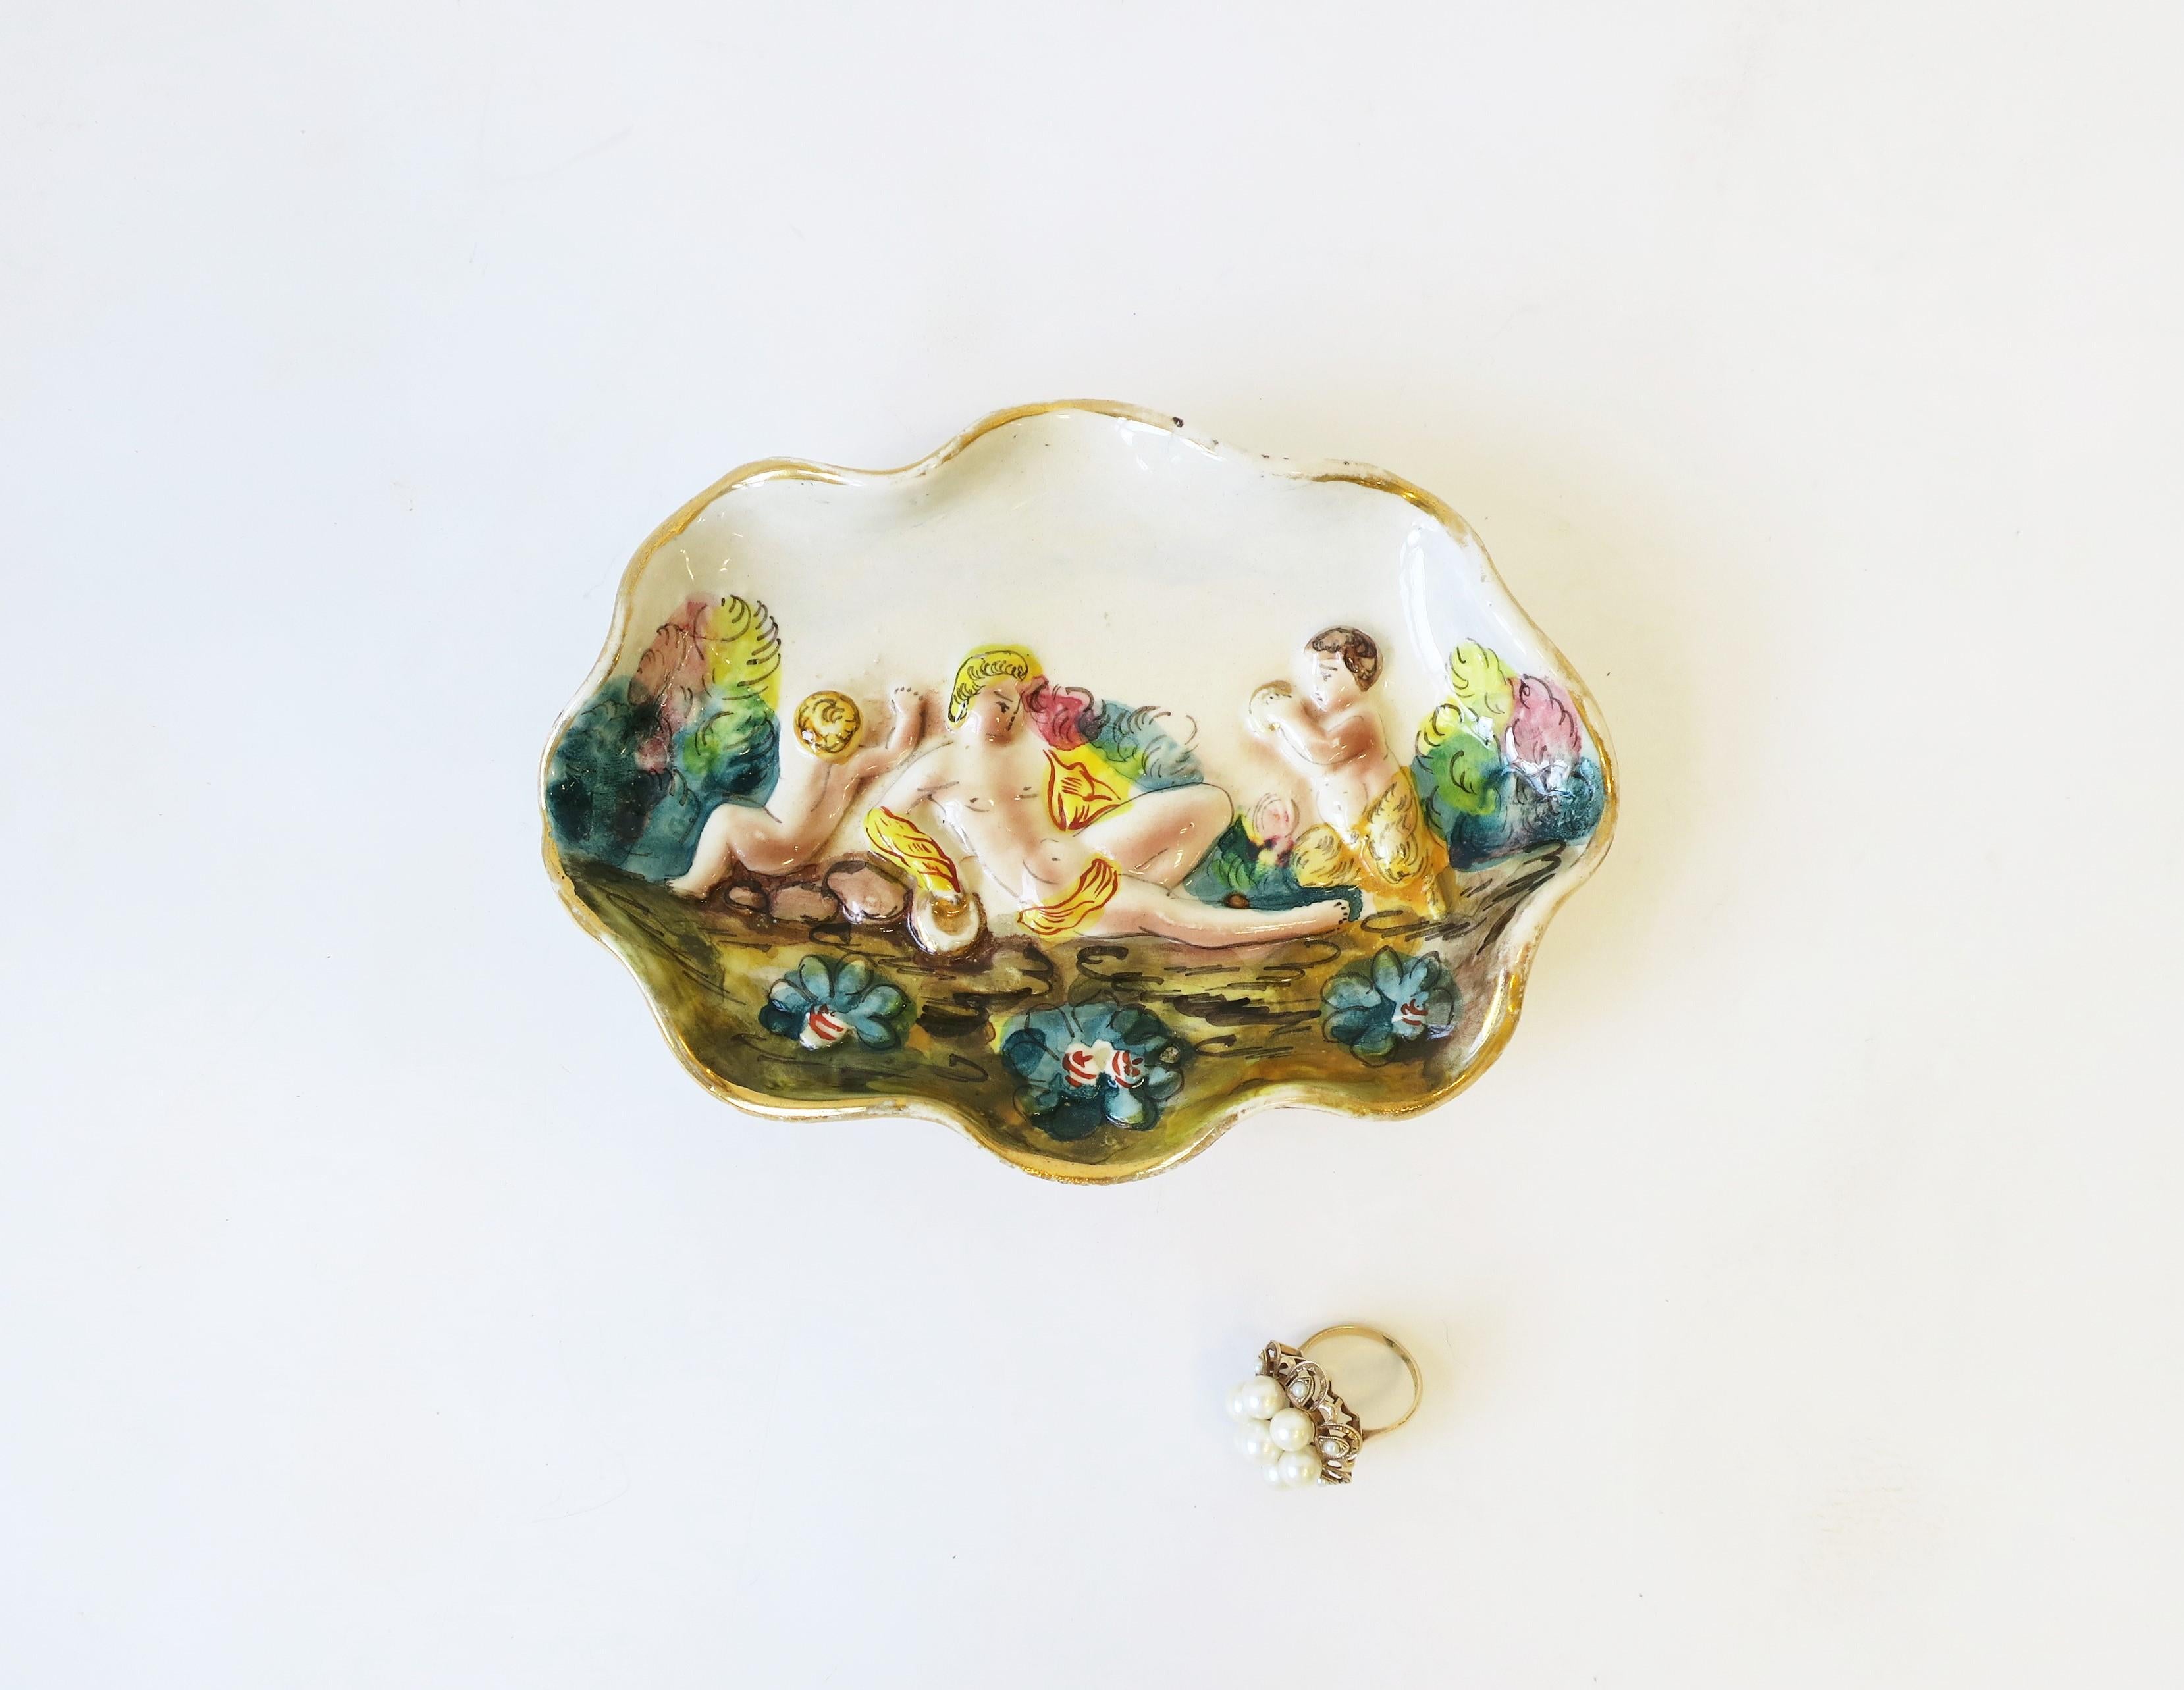 Italian ceramic jewelry dish with center male relief scene, ruffled edge with gold trim, circa 20th century. Made in Italy as marked in last image. A nice piece to hold jewelry or other small items on a desk or vanity area. Piece measures: 4.25